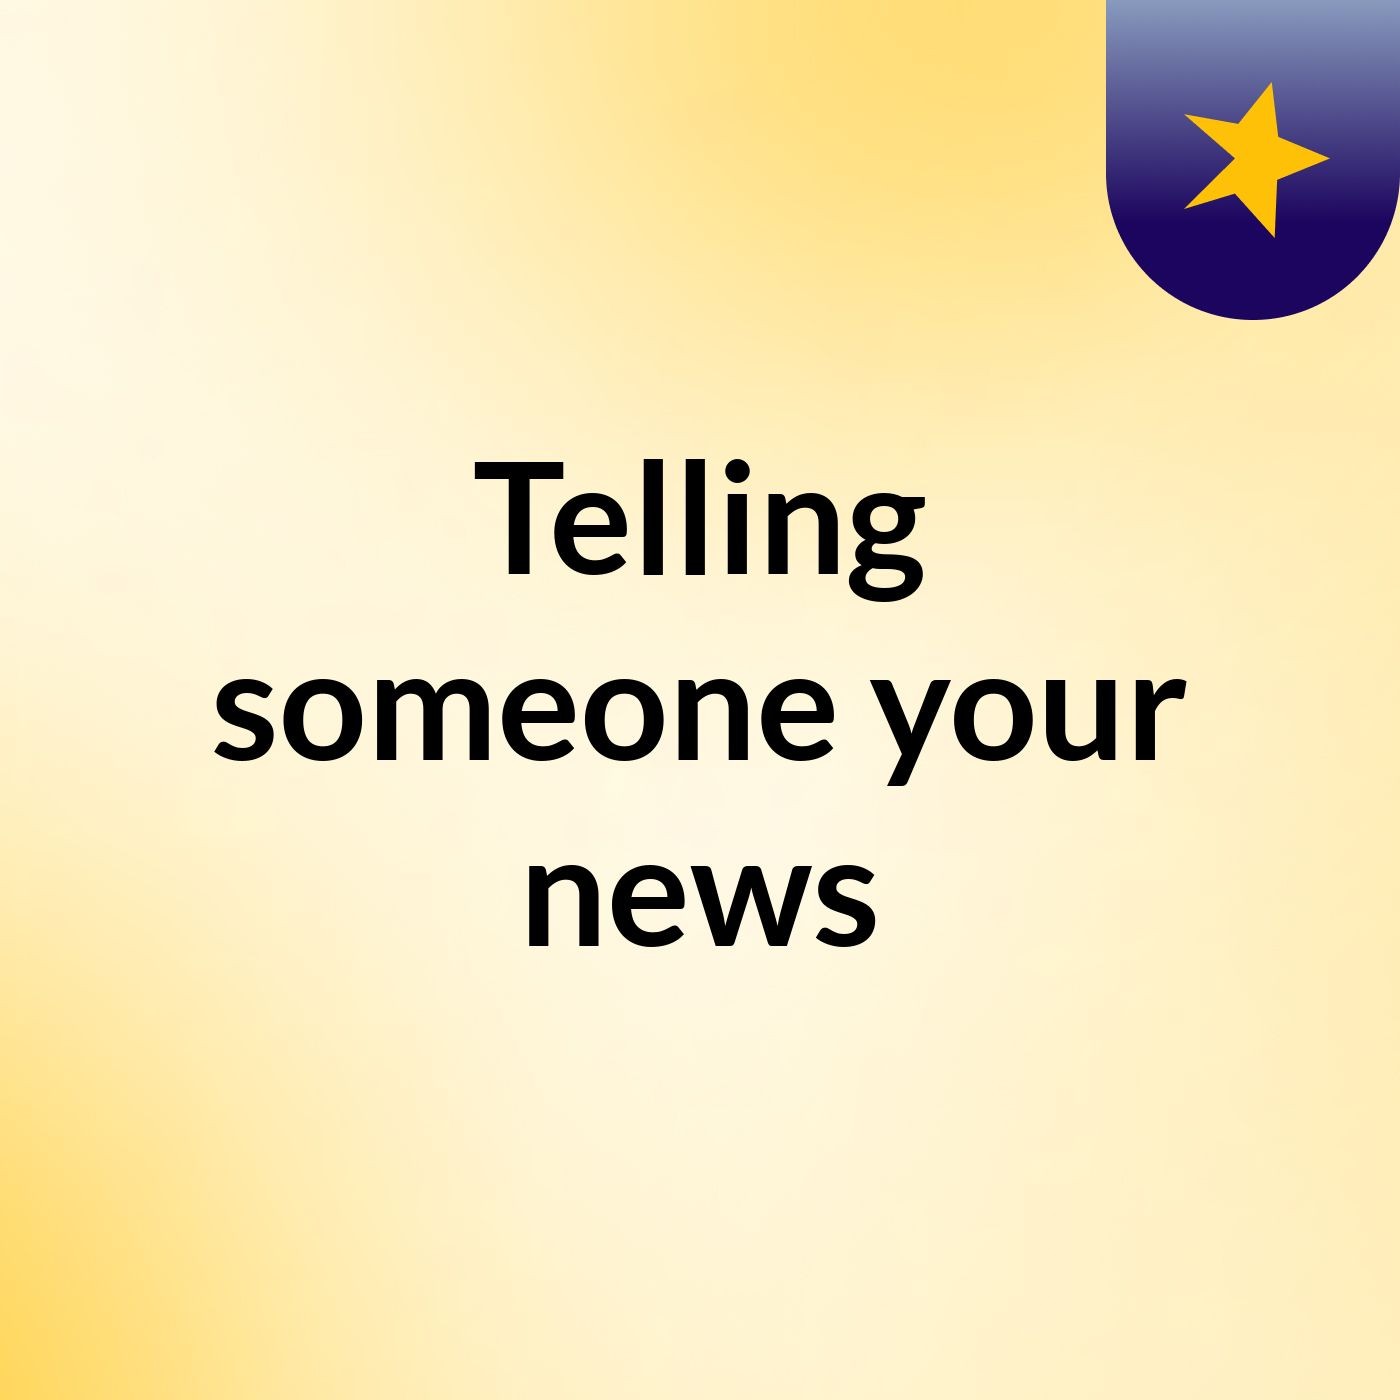 Telling someone your news